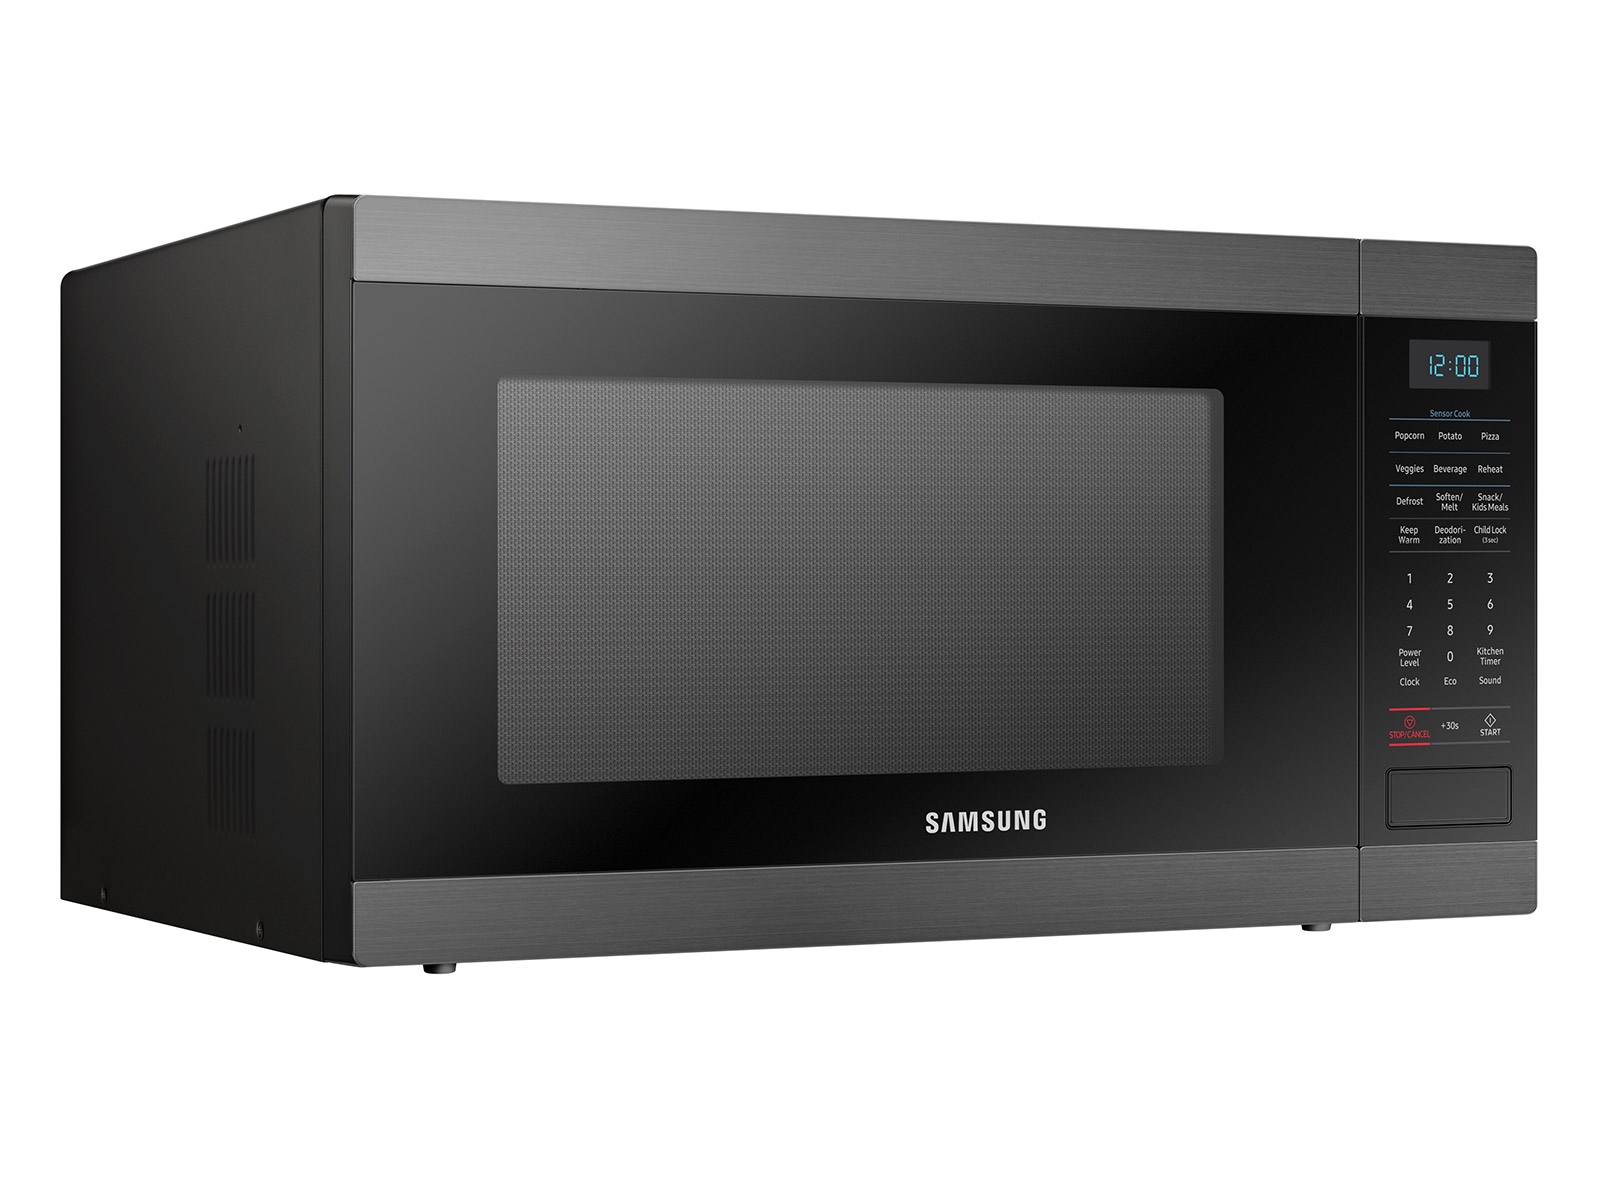 https://image-us.samsung.com/SamsungUS/home/home-appliances/microwaves/countertop/pdp/ms19m8000ag/gallery/020718/07_Microwave_MS19M8000AG_L-Perspective_Black.jpg?$product-details-jpg$